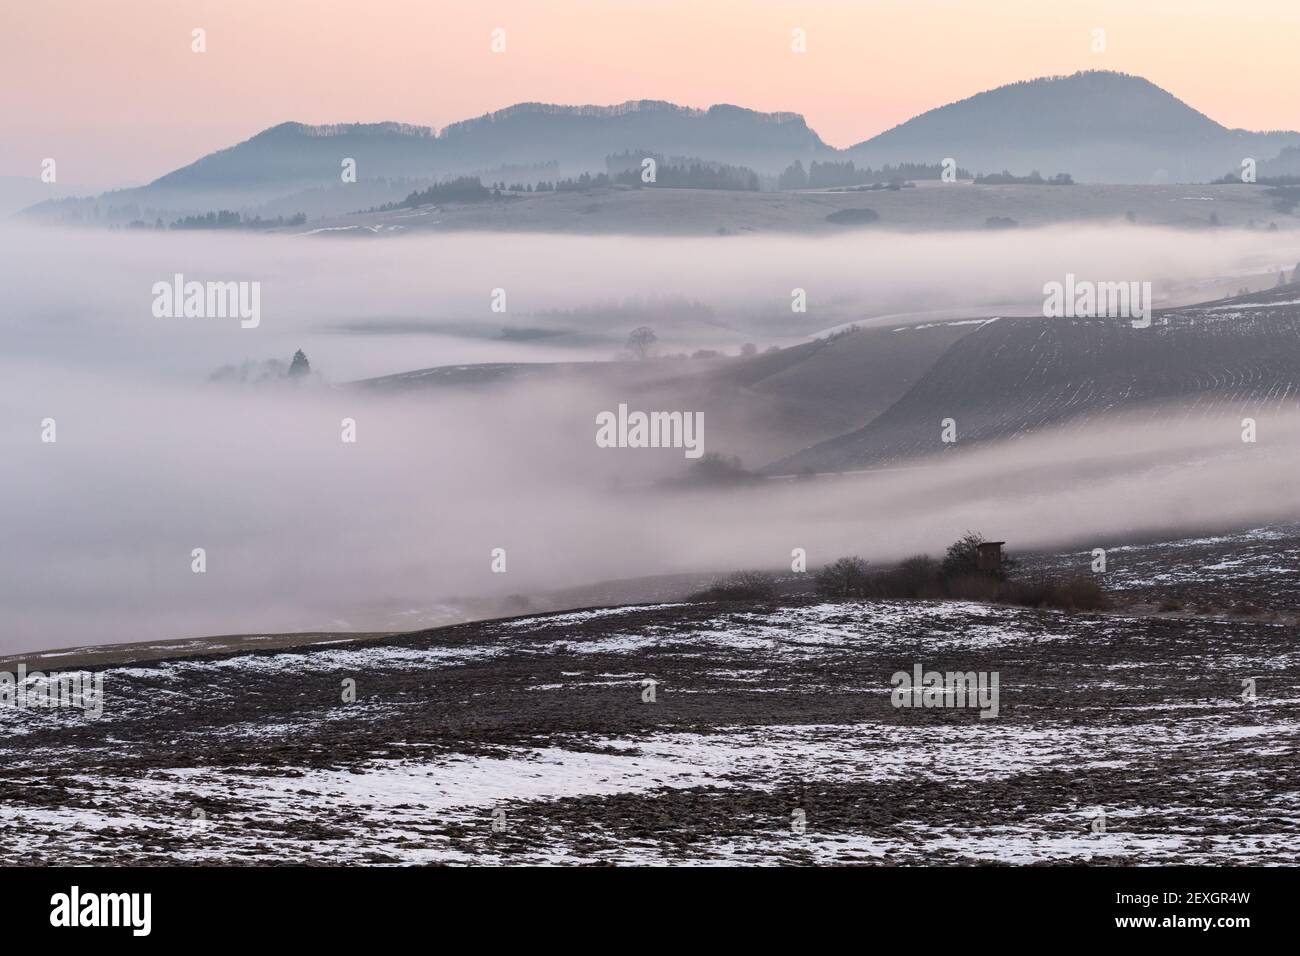 Rural landscape of Turiec region in northern Slovakia. Stock Photo